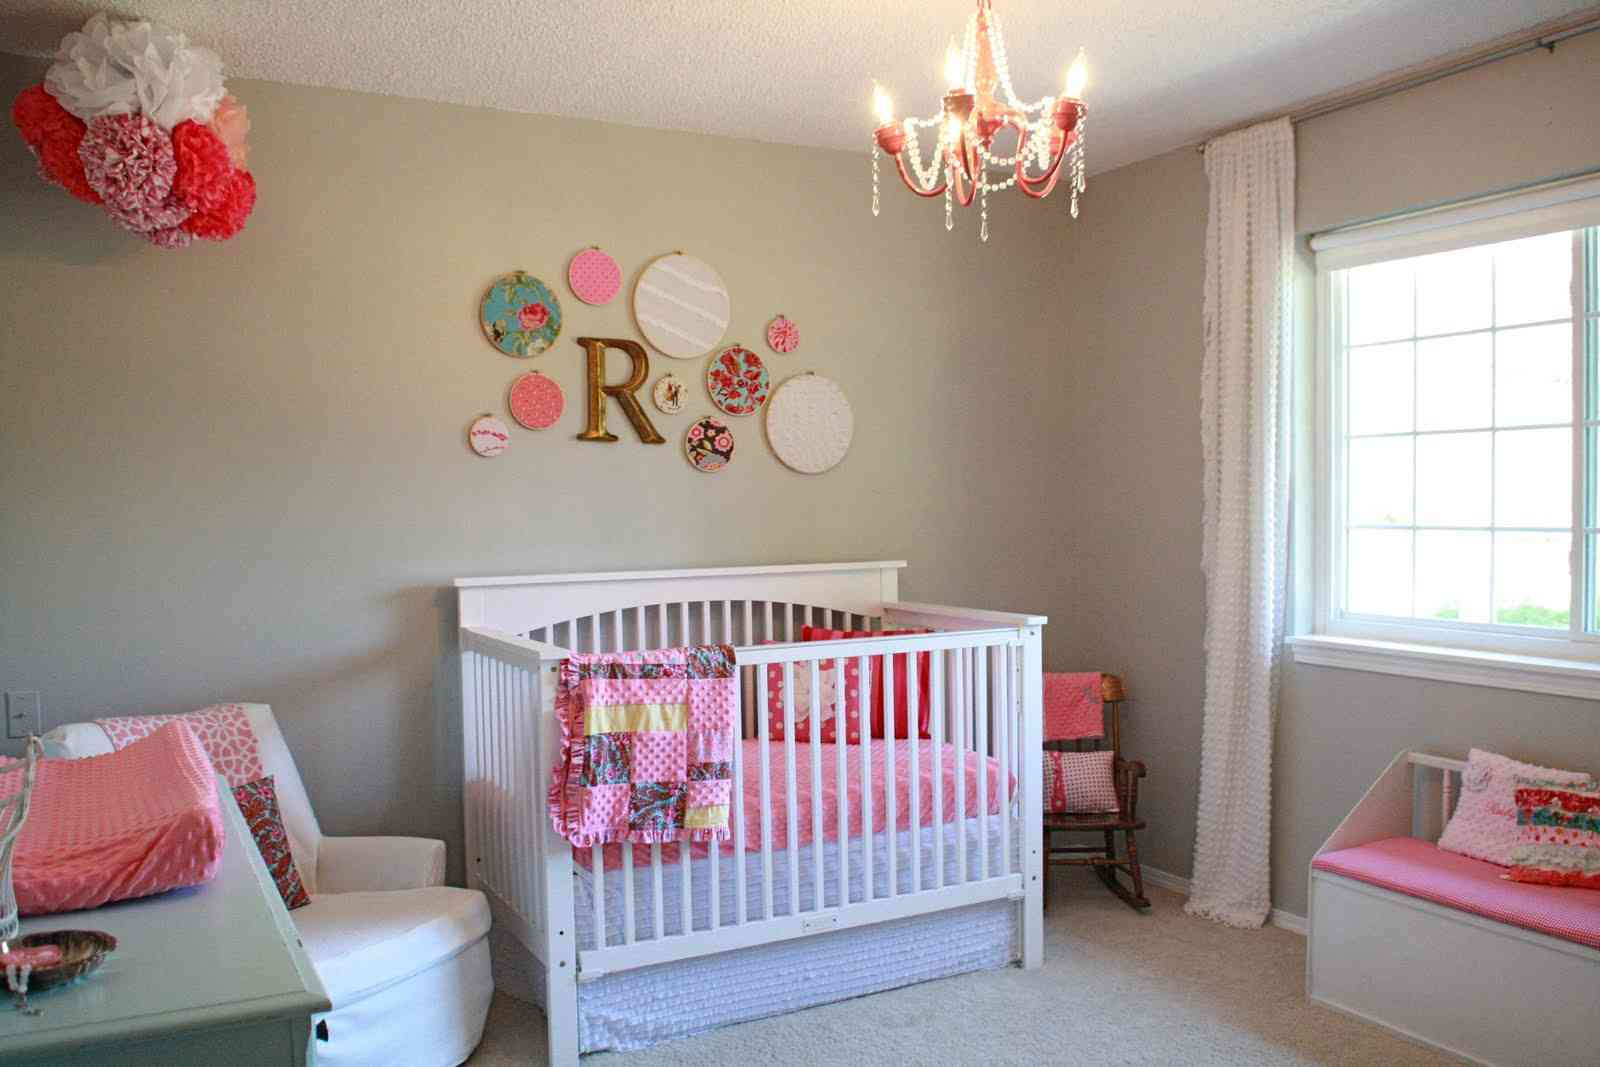 Room Decor For Baby
 Ensuring A Safe Room for Your Baby in 2016 – Babies Ideas